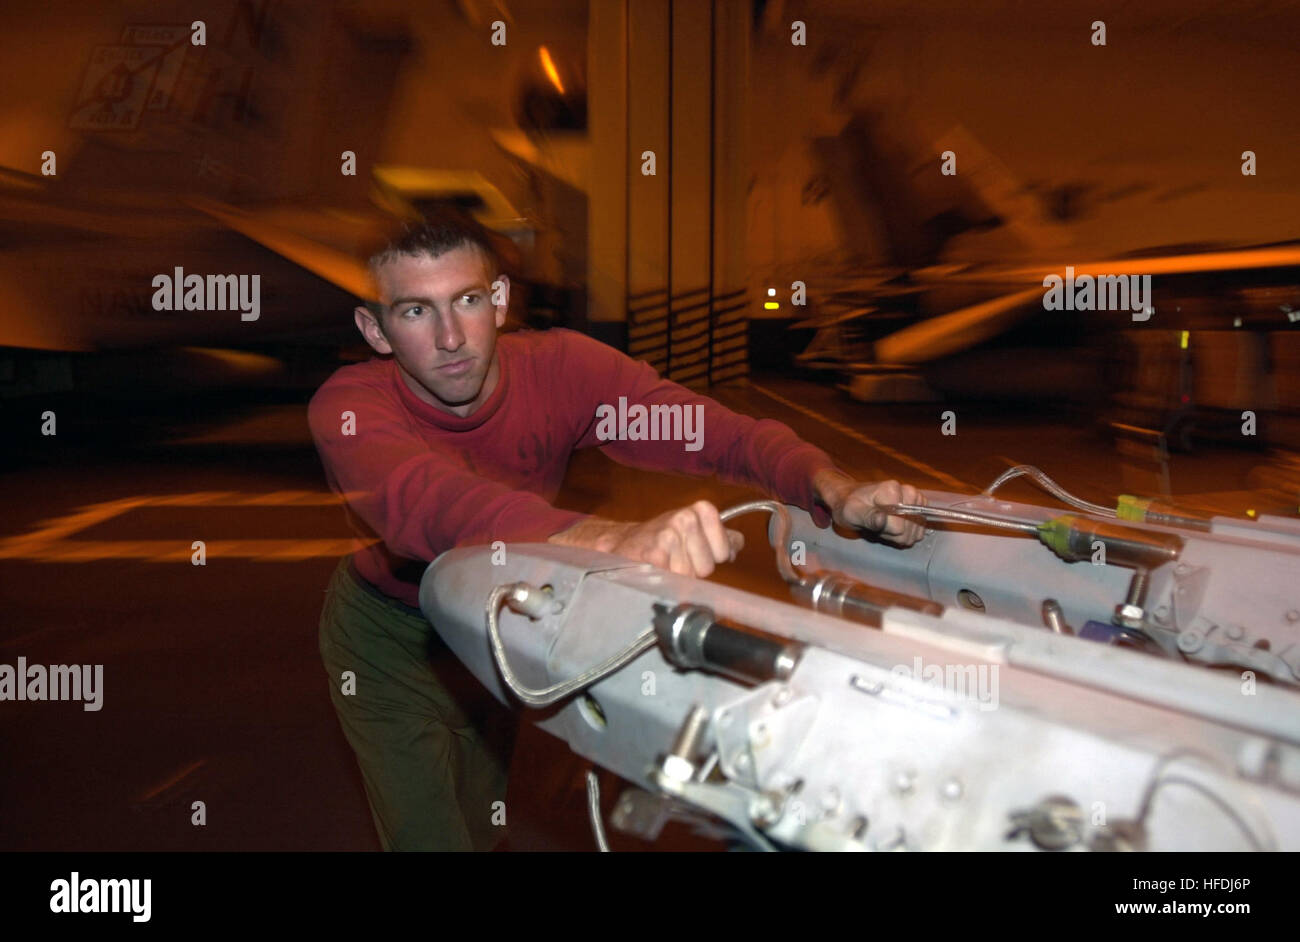 020918-N-9411J-003 At sea aboard USS Nimitz (CVN 68) Sep. 18, 2002 -- Aviation Ordnanceman 3rd Class Chris Blakeman from Gillette, Wyo., guides multiple ejector racks to the ship’s upper stage weapons elevator two before morning flight quarters. Nimitz is undergoing Tailored Ships Training Availability (TSTA) Two and Three off the California coast.  U.S. Navy photo by Photographer’s Mate 3rd Class Christopher Leroy Jordan.  (RELEASED) US Navy 020918-N-9411J-003 Guiding multiple ejector racks aboard USS Nimitz Stock Photo